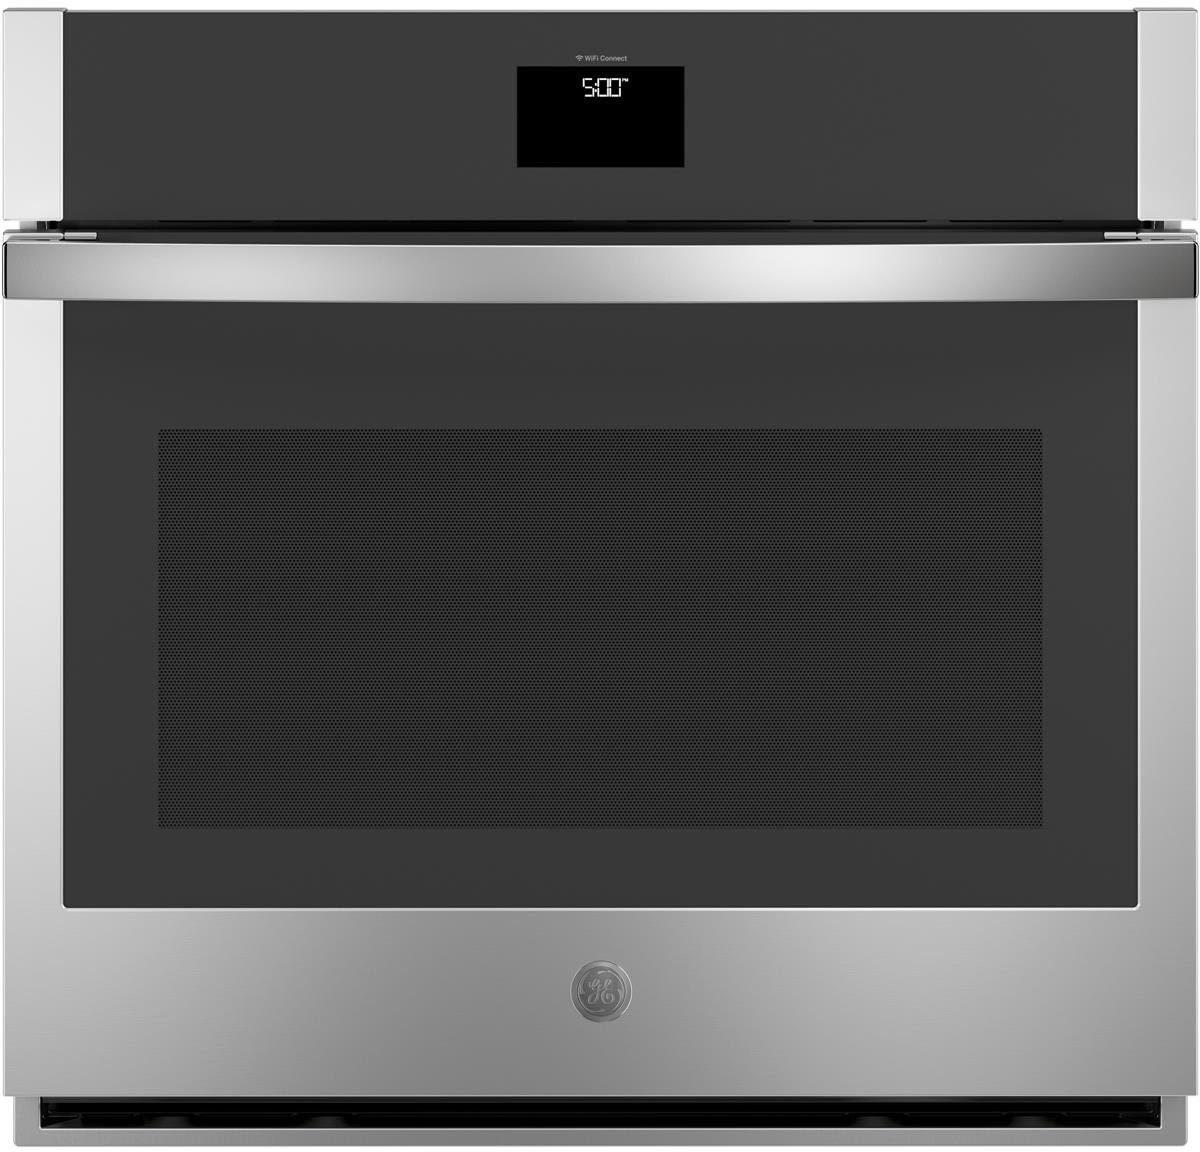 JP5030SJSS GE ®30 Built-In Touch Control Electric Cooktop STAINLESS STEEL  ON BLACK - Jetson TV & Appliance